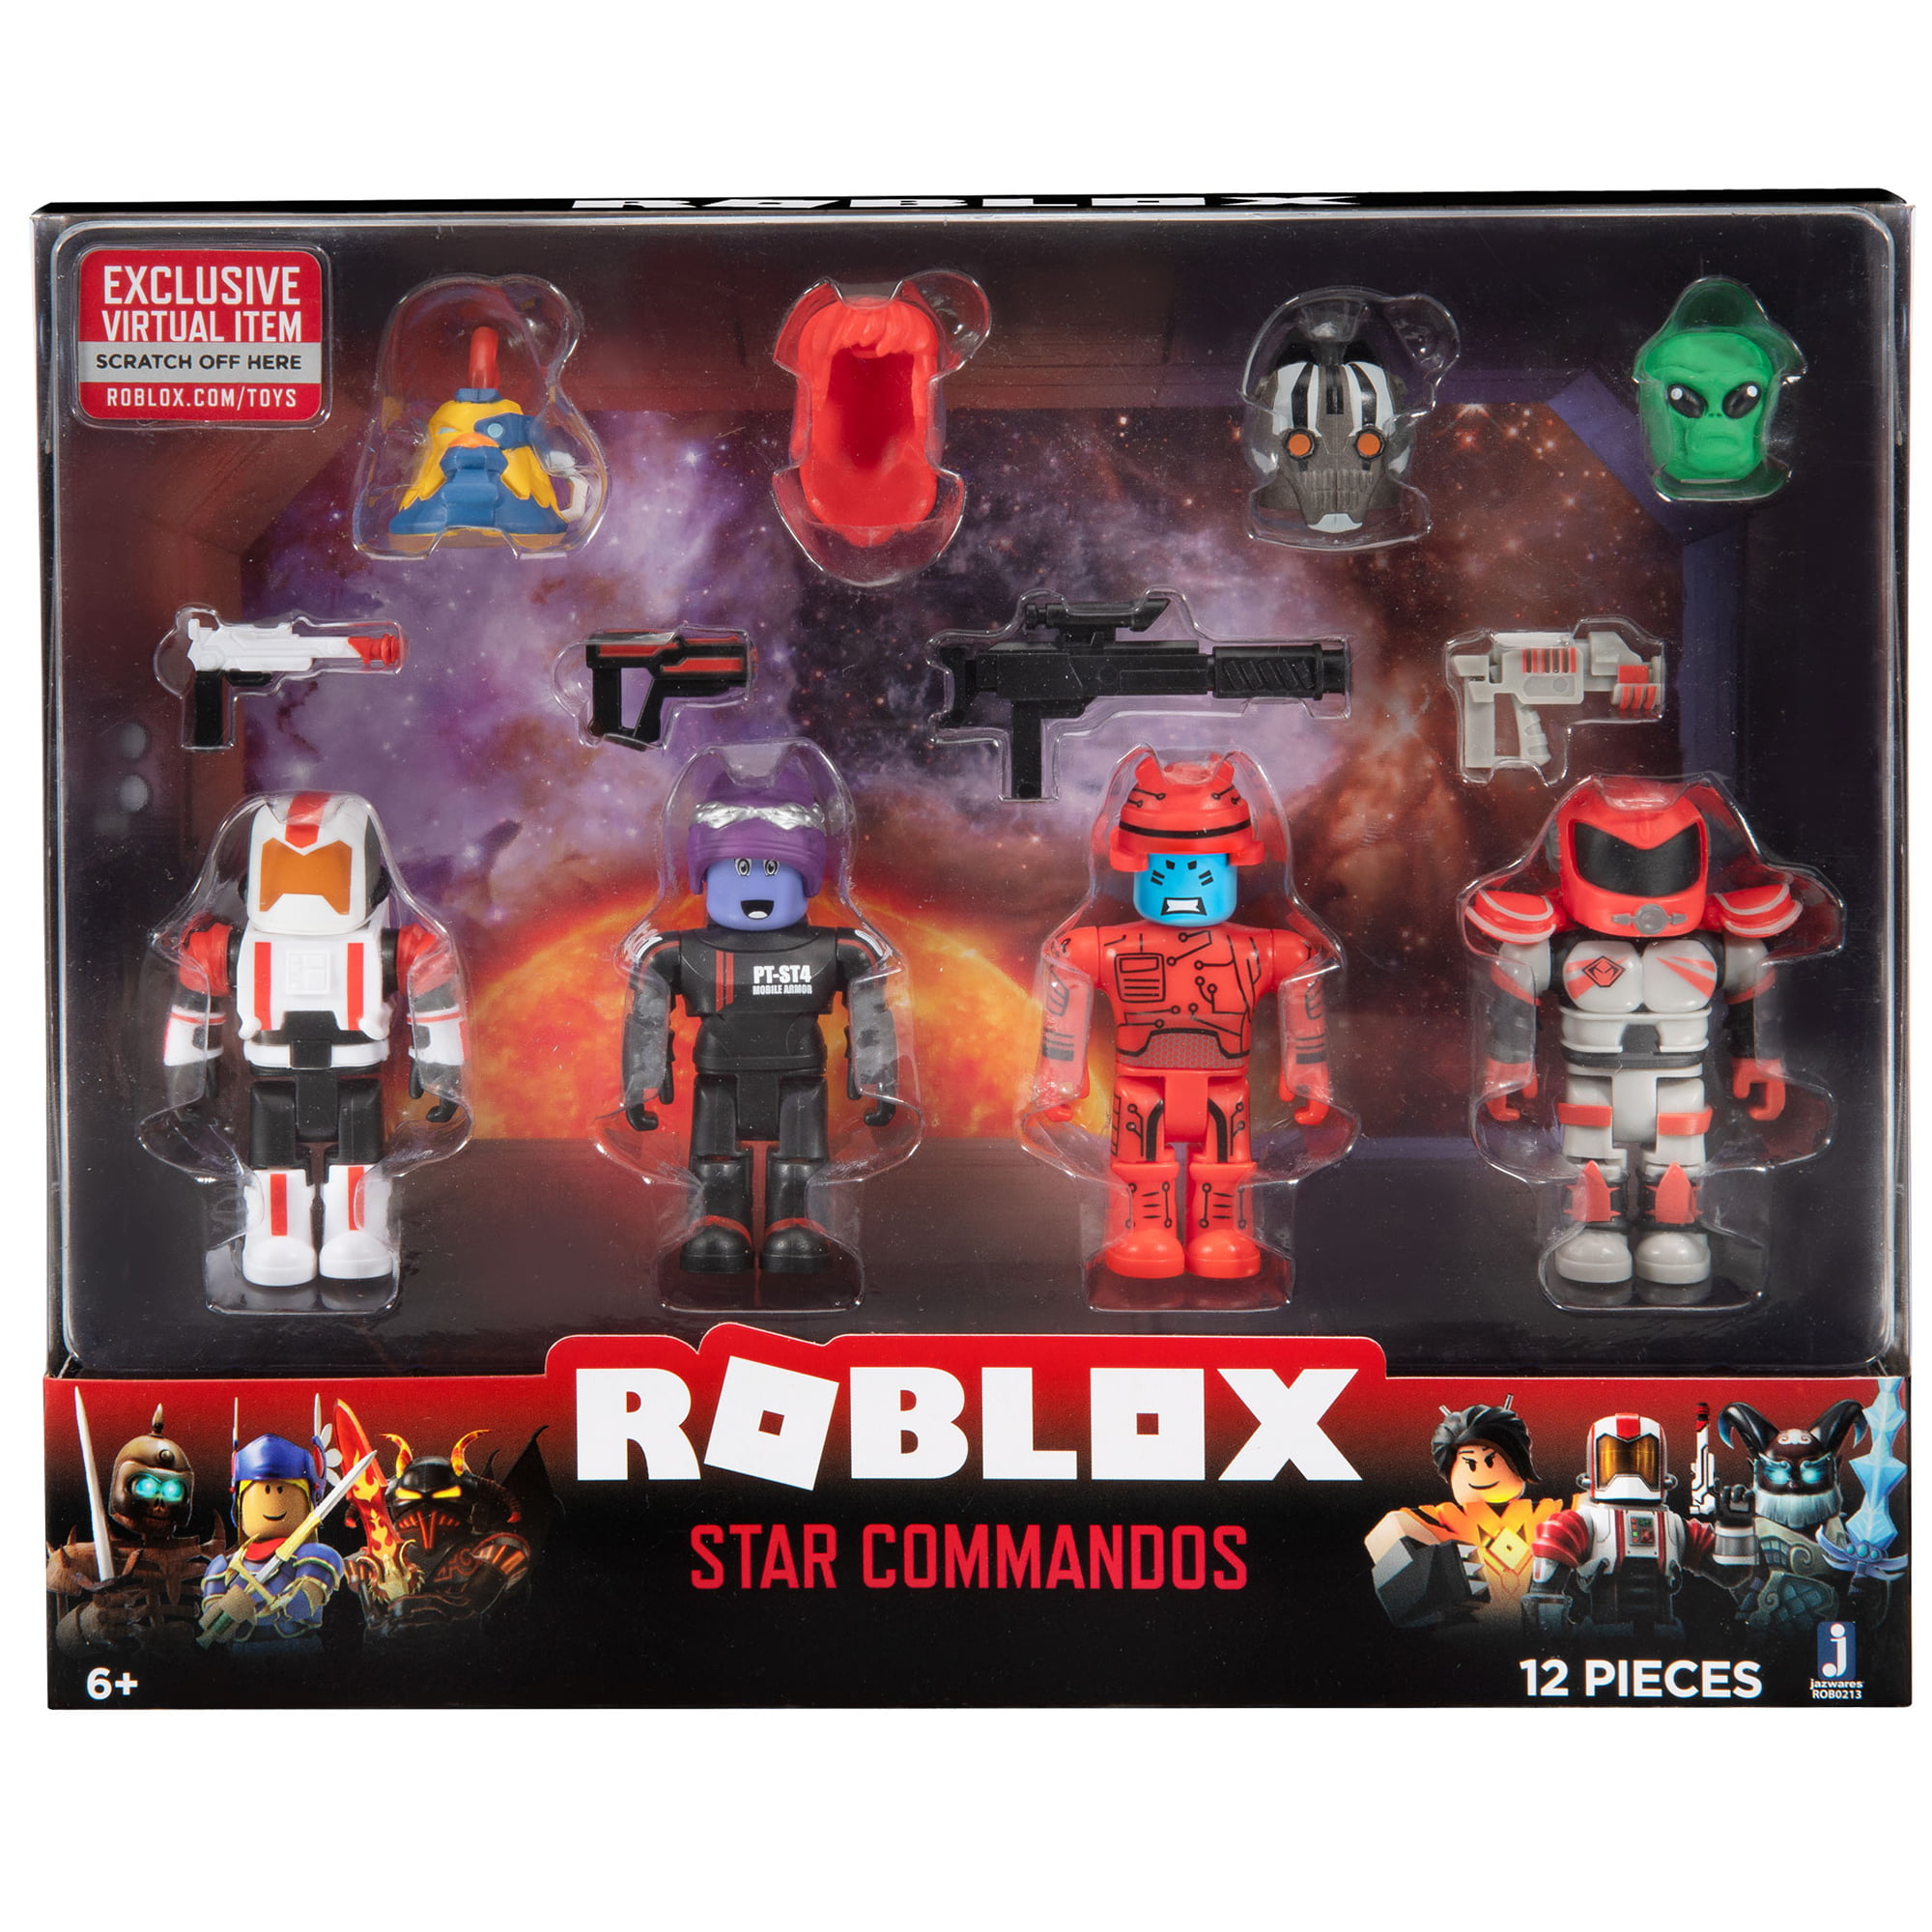 Roblox Action Collection Star Commandos Four Figure Pack Includes Exclusive Virtual Item Walmart Com Walmart Com - roblox purple commando